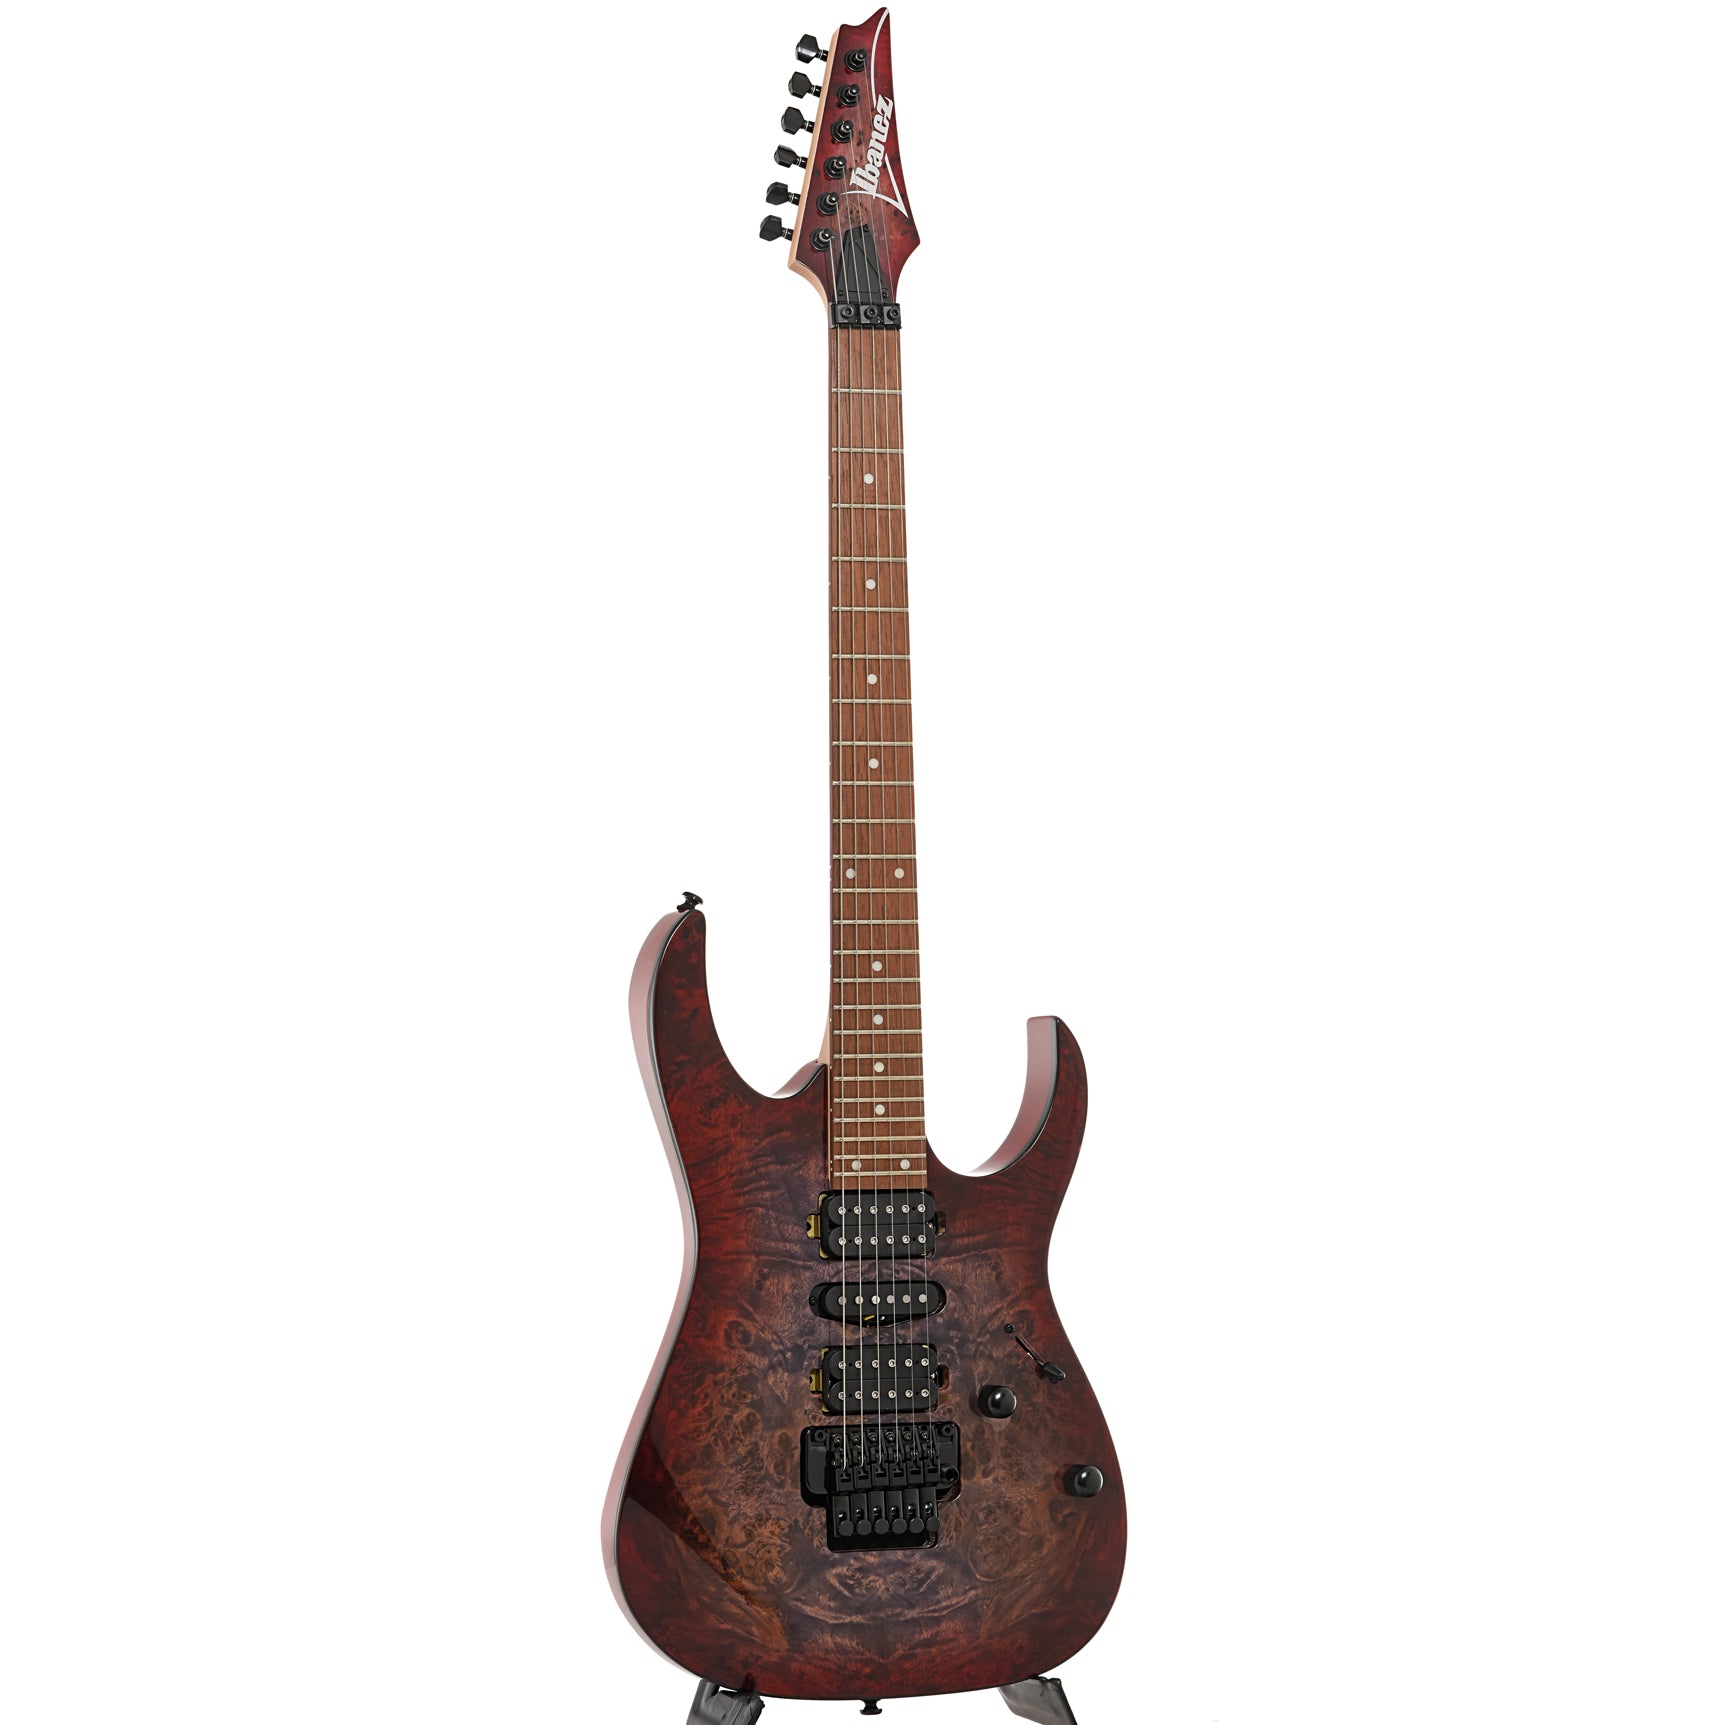 Full front and side of Ibanez RG470PB Electric Guitar, Red Eclipse Burst